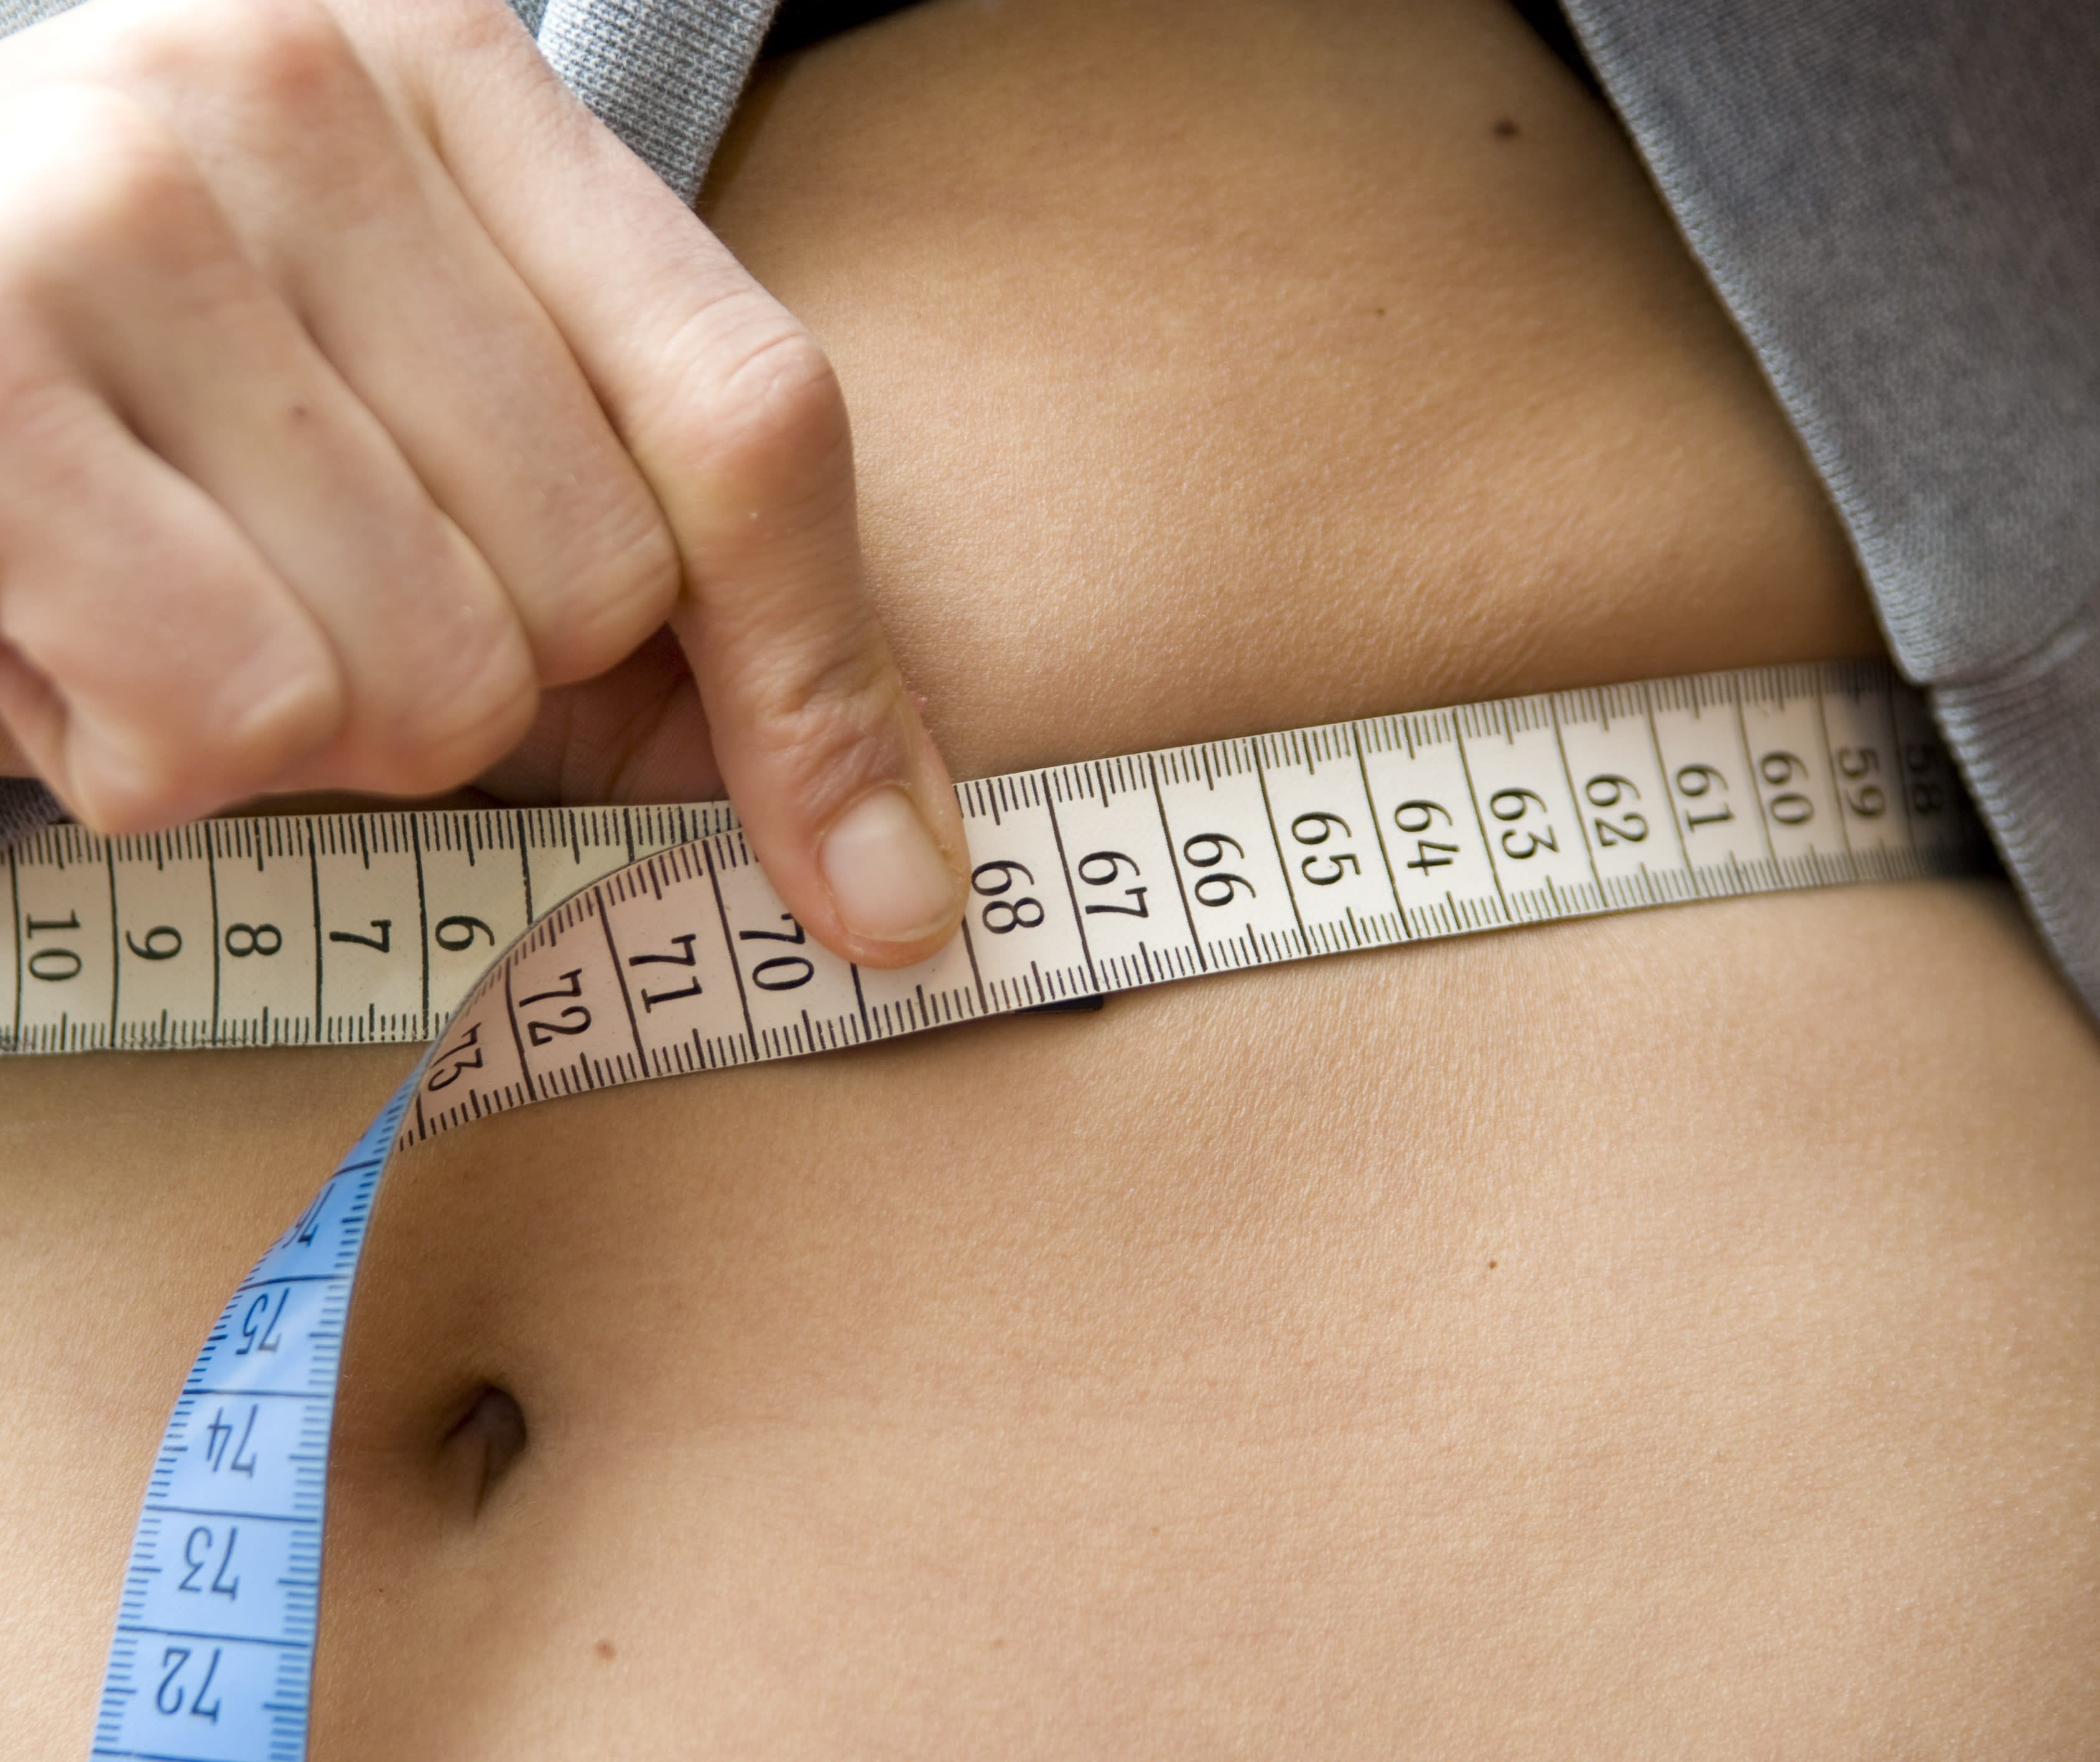 Waist Size Could Be More Important Than Bmi In Defining Obesity